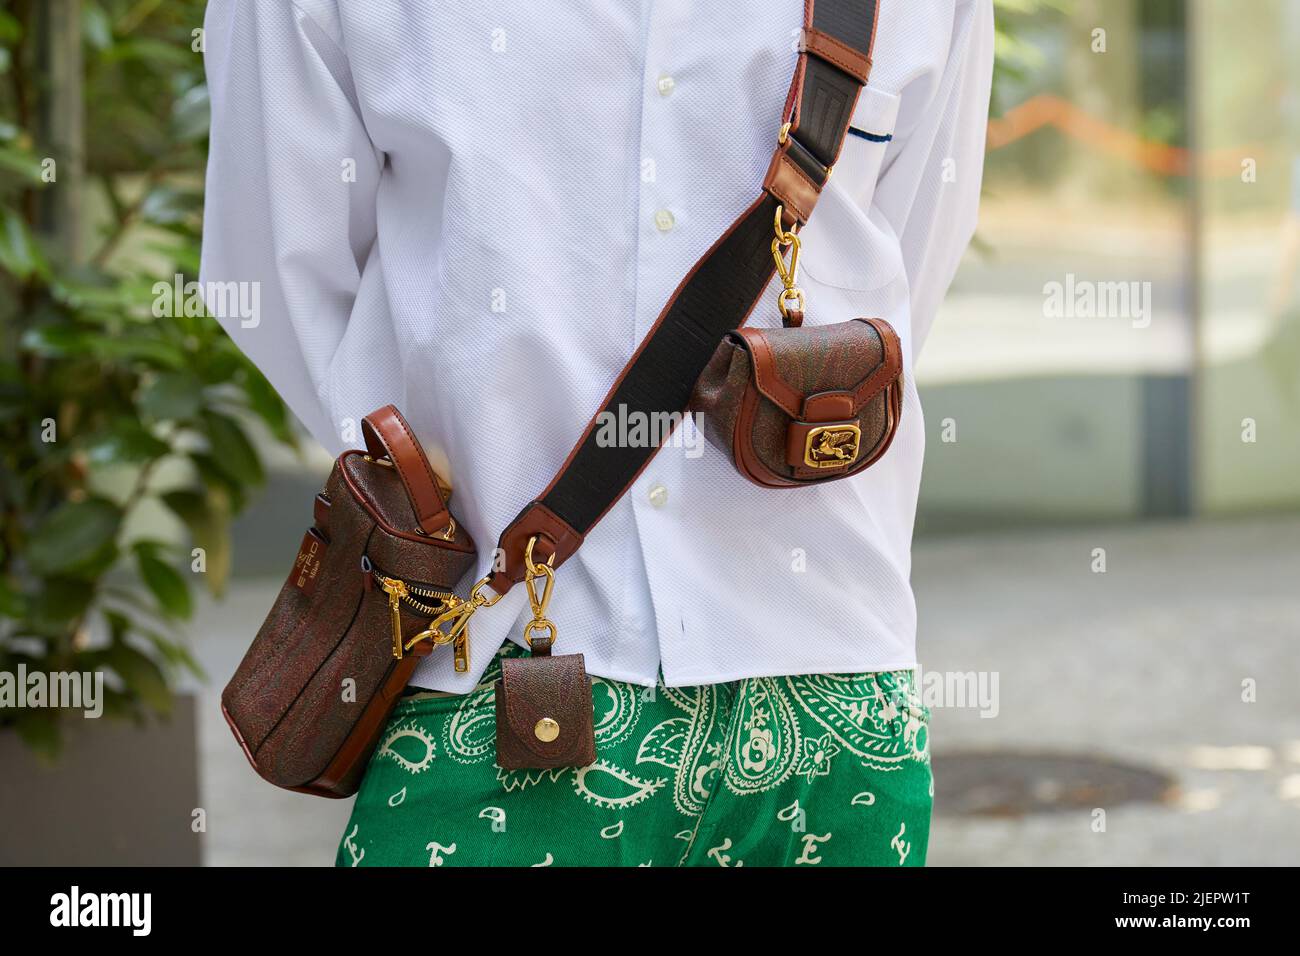 MILAN, ITALY - JUNE 19, 2022: Man with Etro brown leather bag with golden details before Etro fashion show, Milan Fashion Week street style Stock Photo